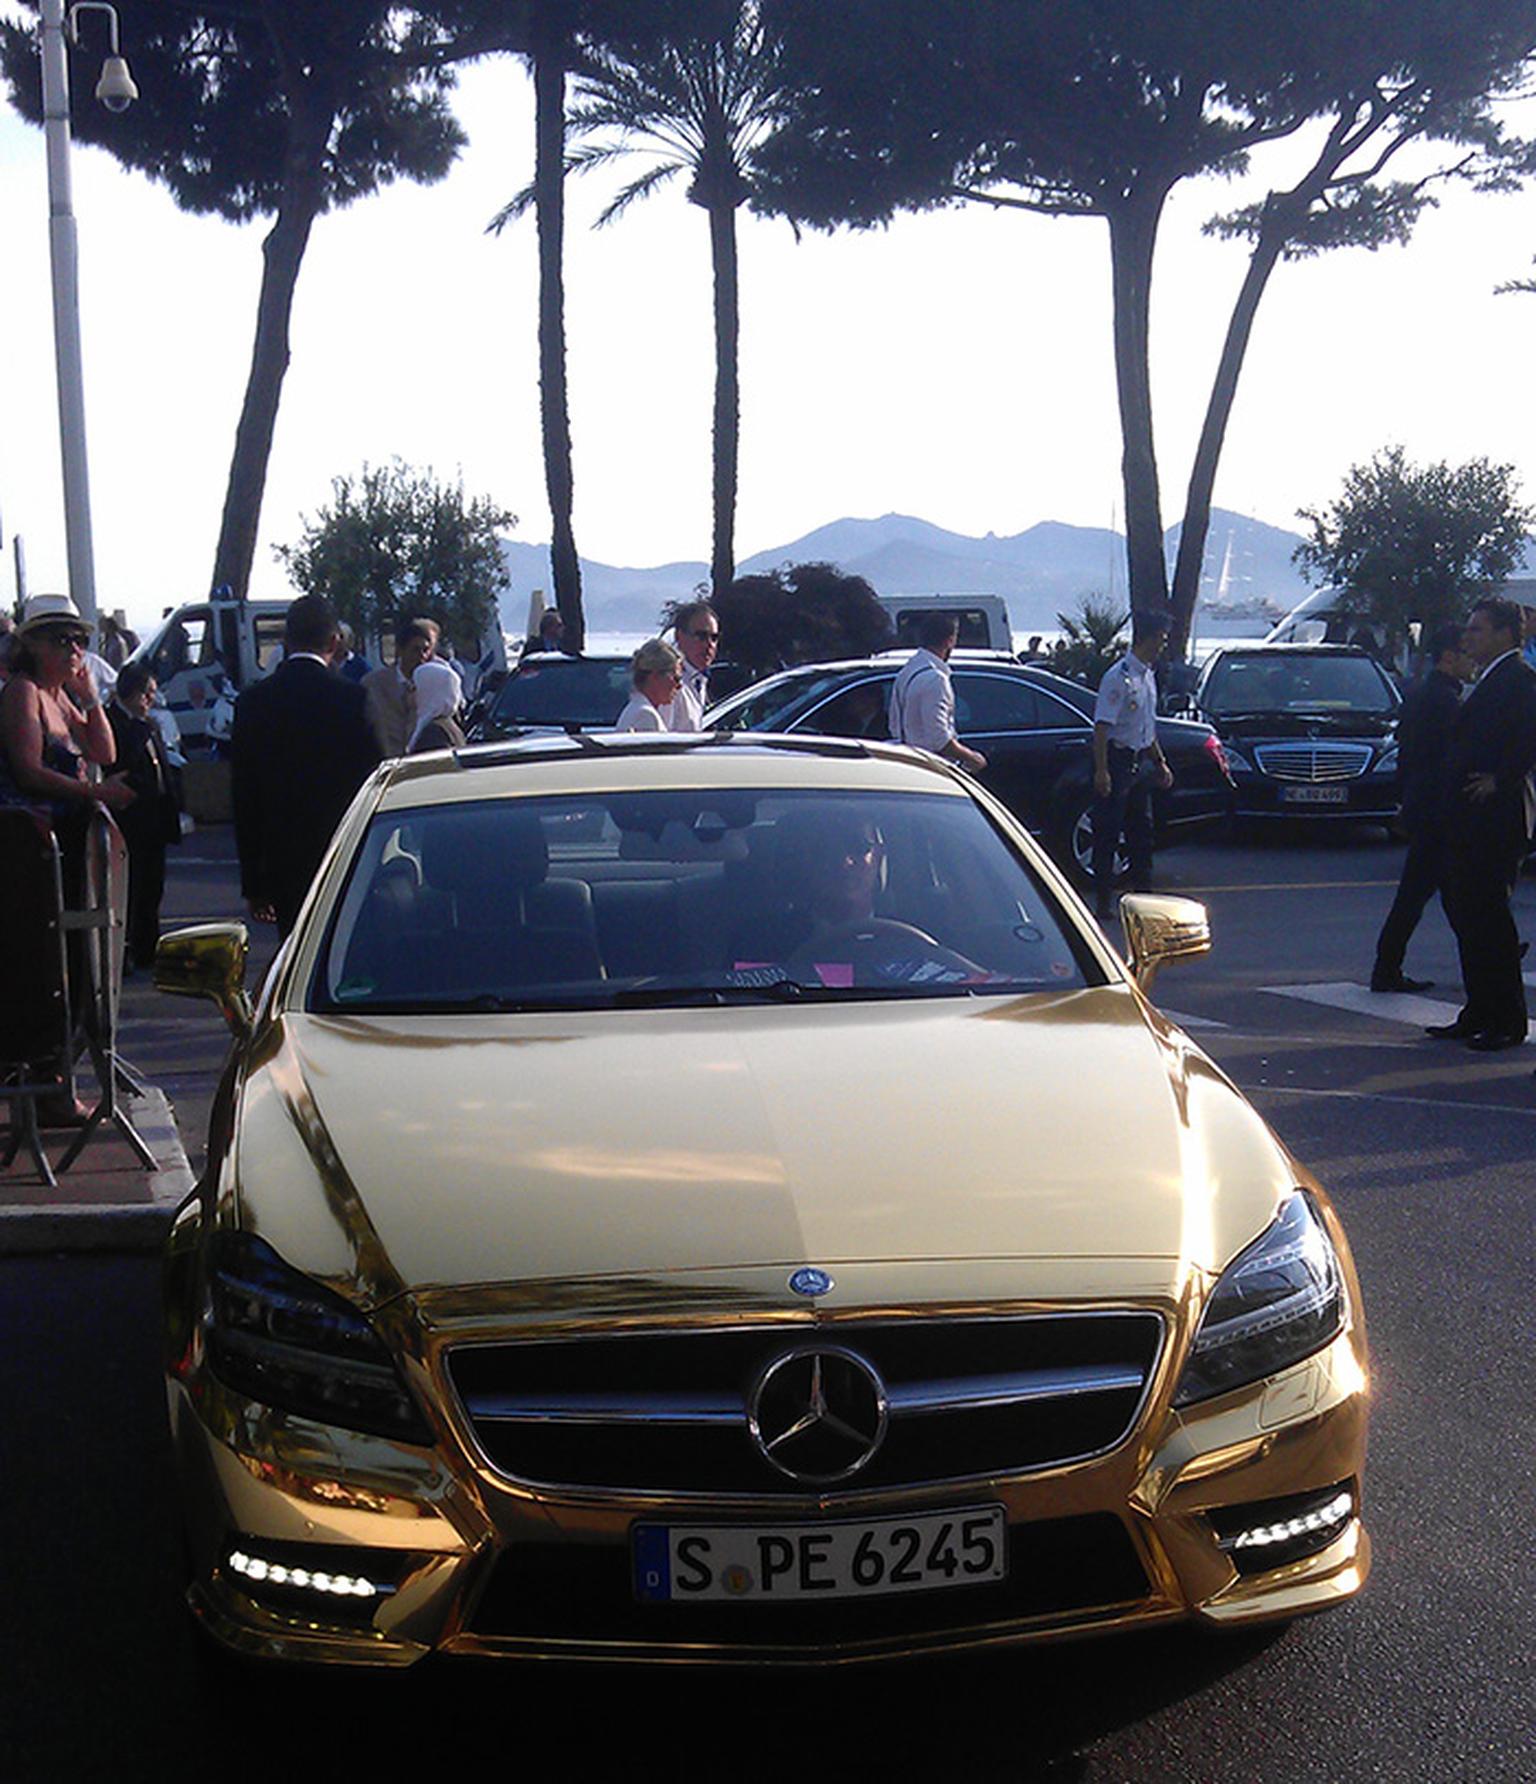 Only-in-Cannes-a-gold-Merc.jpg